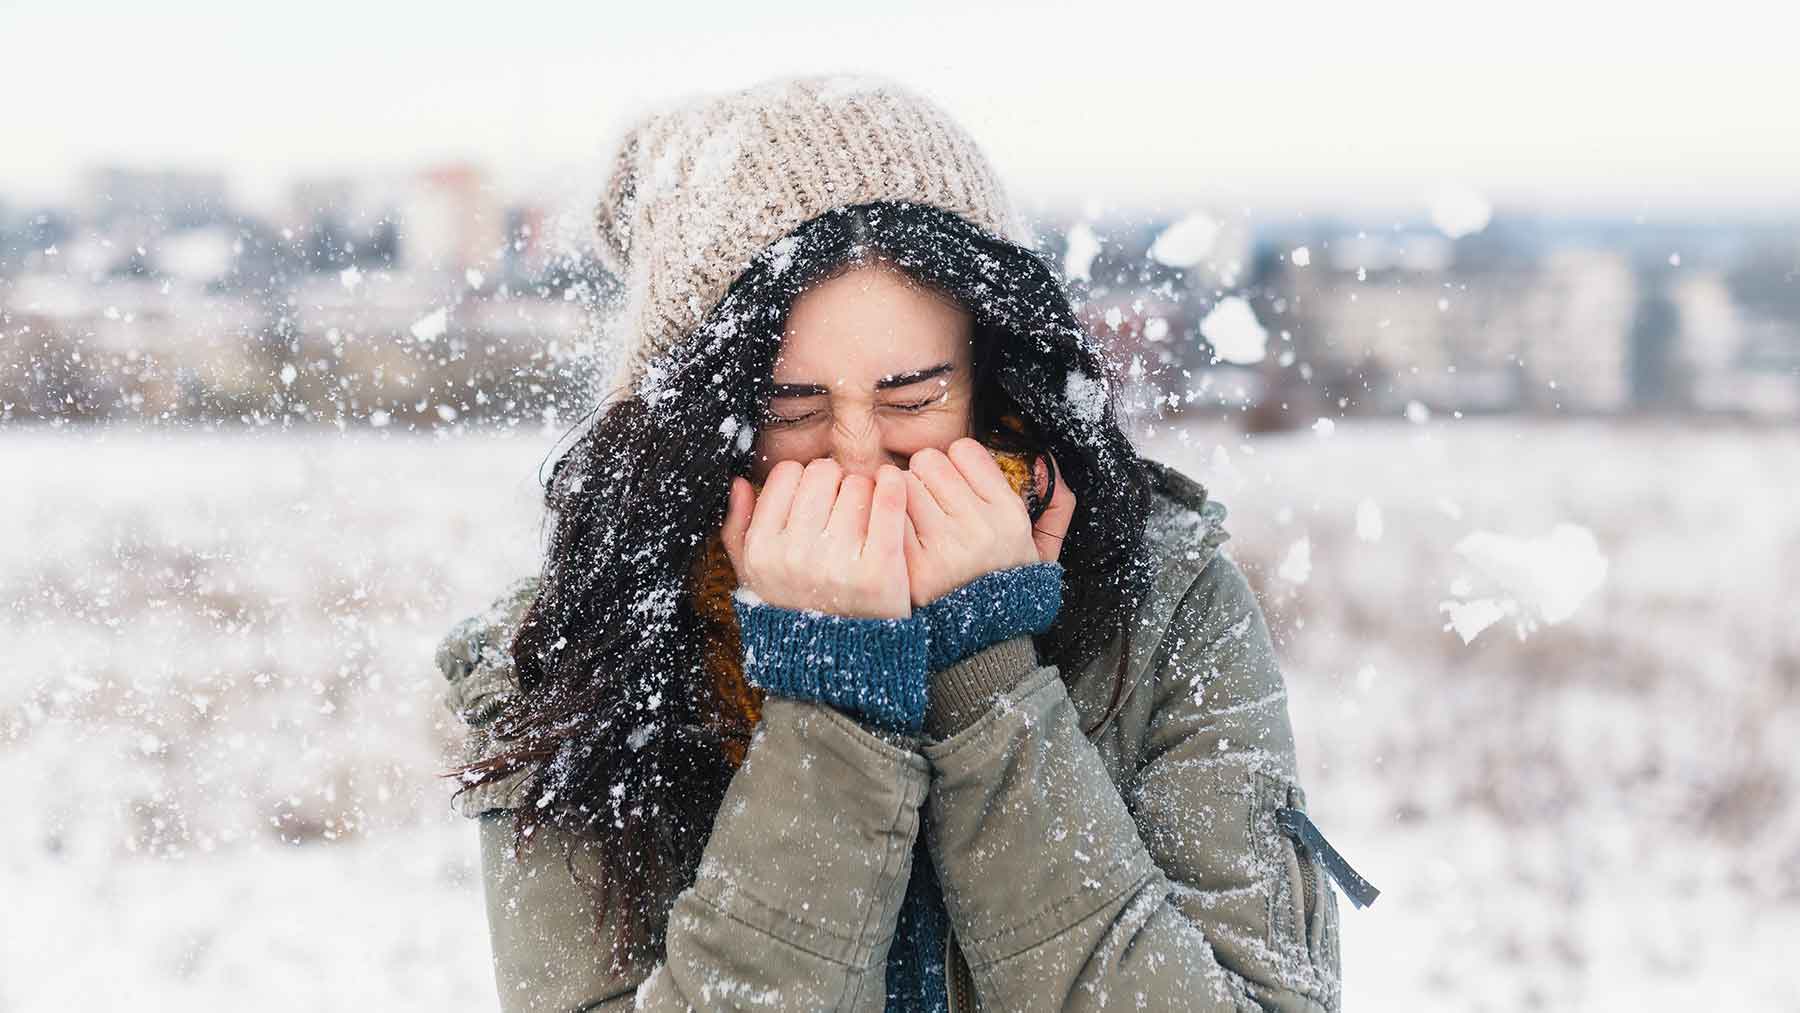 How to keep your eyes safe in cold weather | Ohio State Medical Center